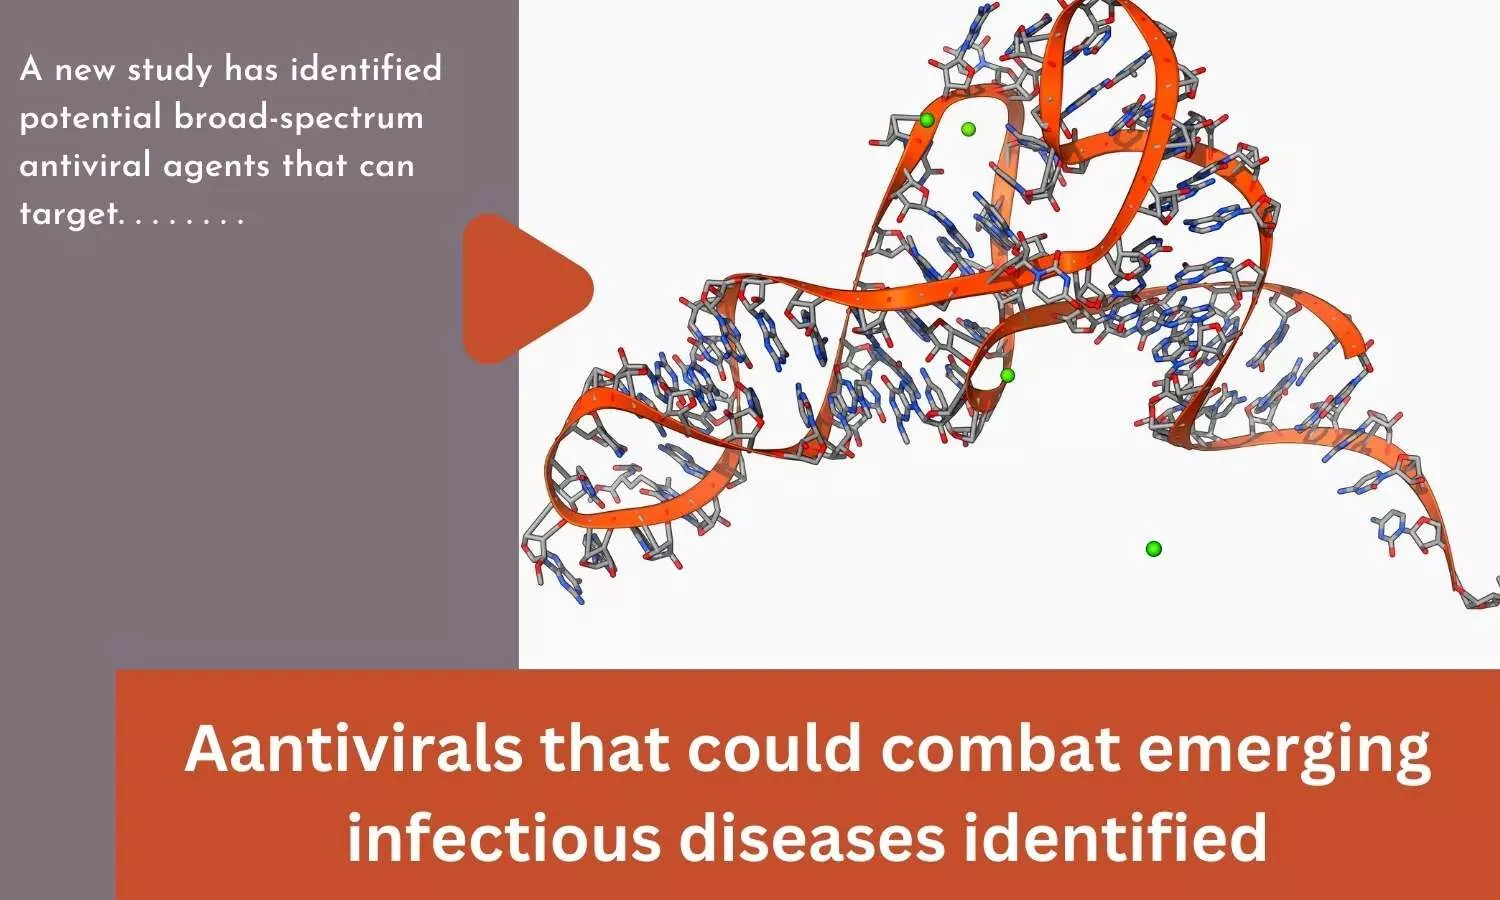 Aantivirals that could combat emerging infectious diseases identified